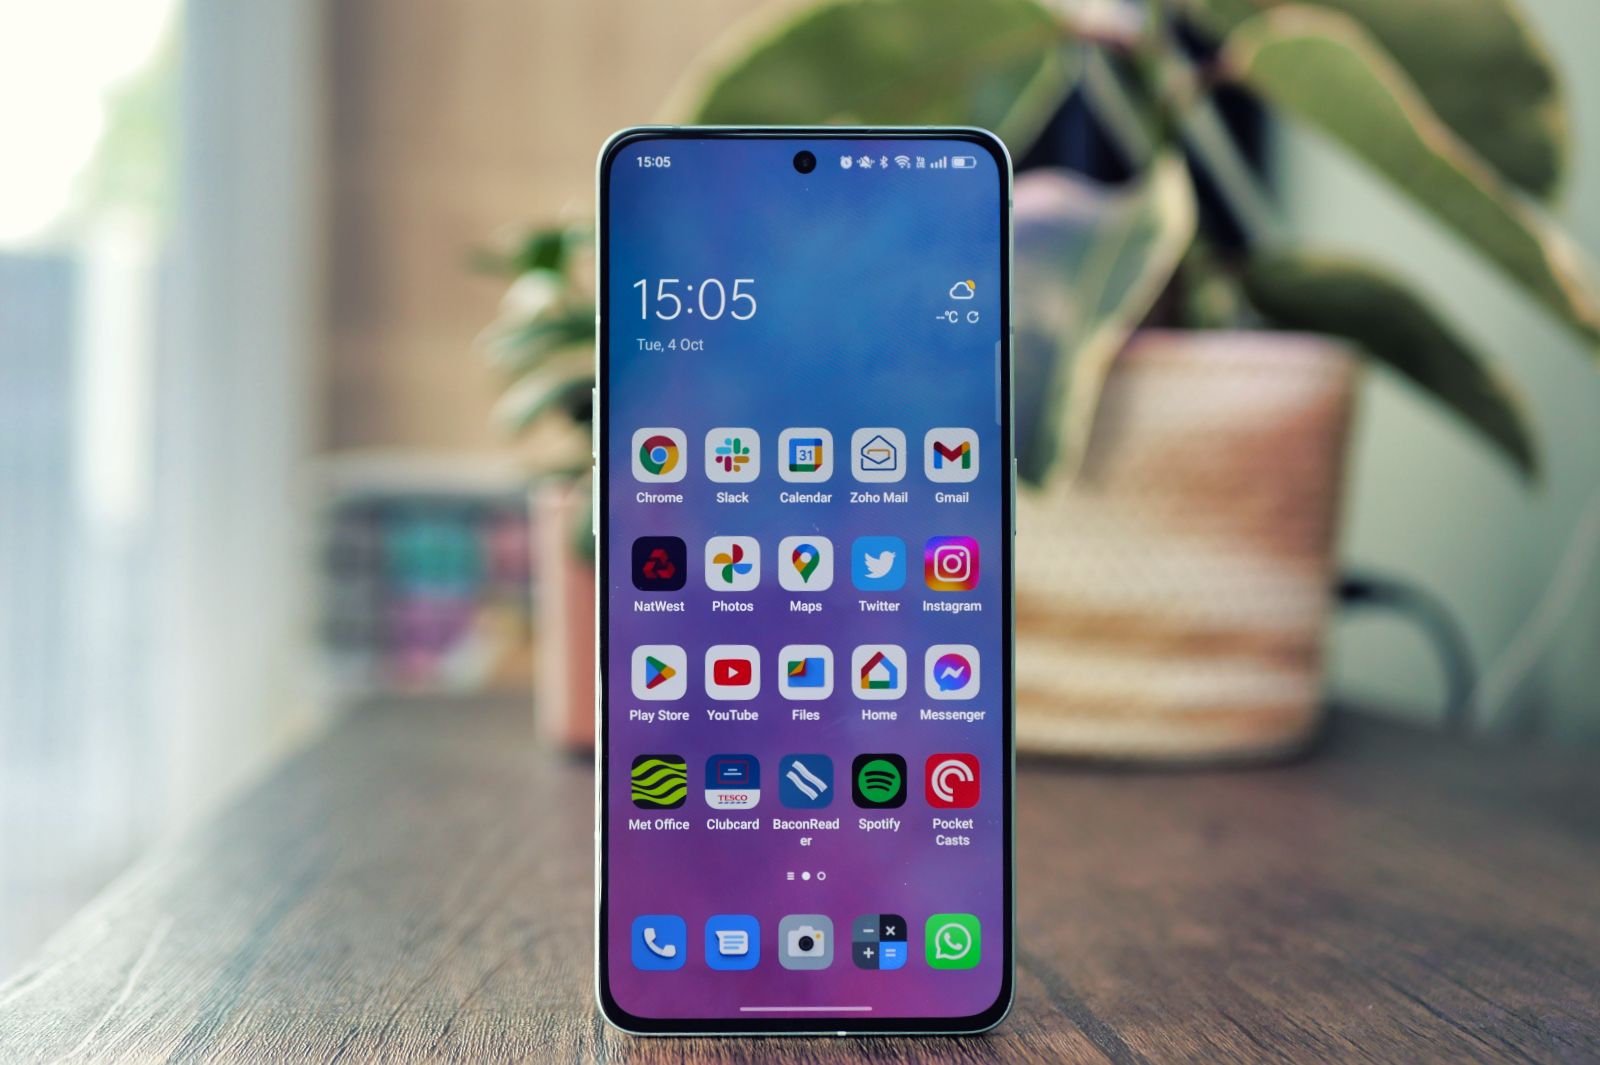 Oppo Reno 8 Pro review: Slick design, but what else?